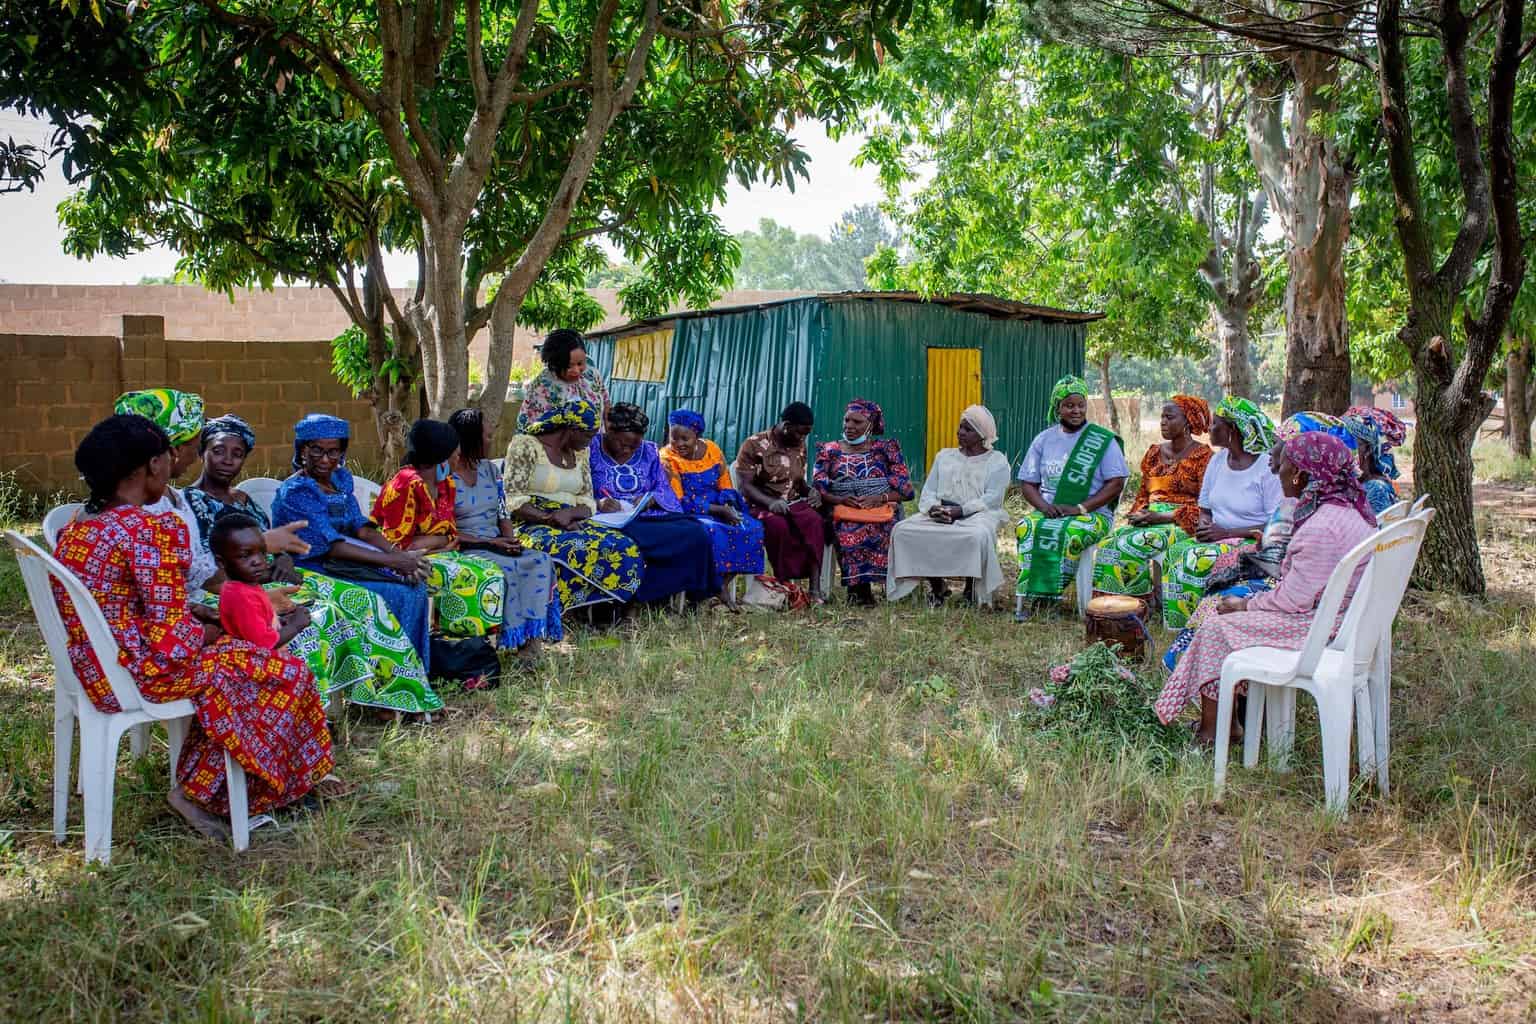 Members of the Small-scale Women Farmers Organization in Nigeria gather for a meeting to receive updates and skills training